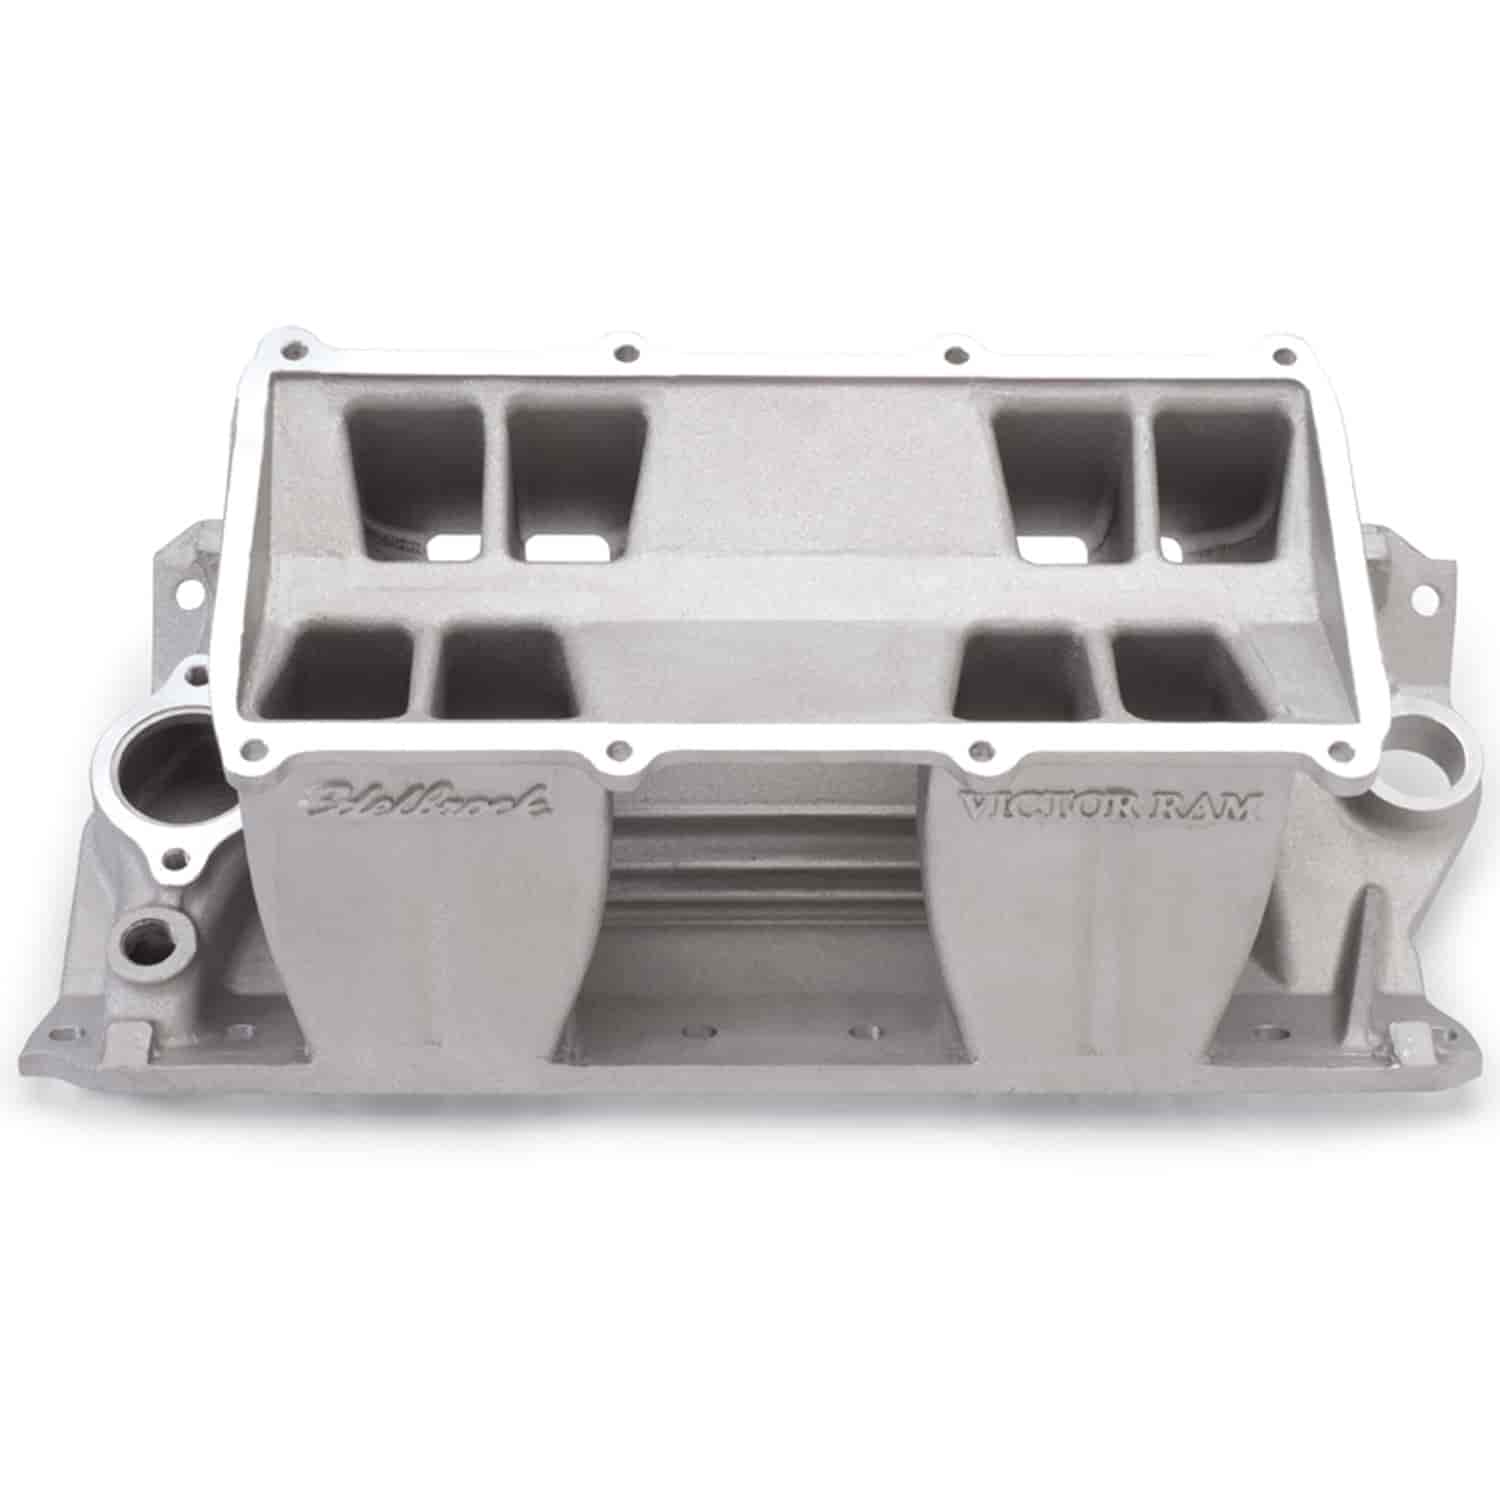 Victor Ram 23° Tunnel Ram Intake Manifold Base only for Small Block Chevy